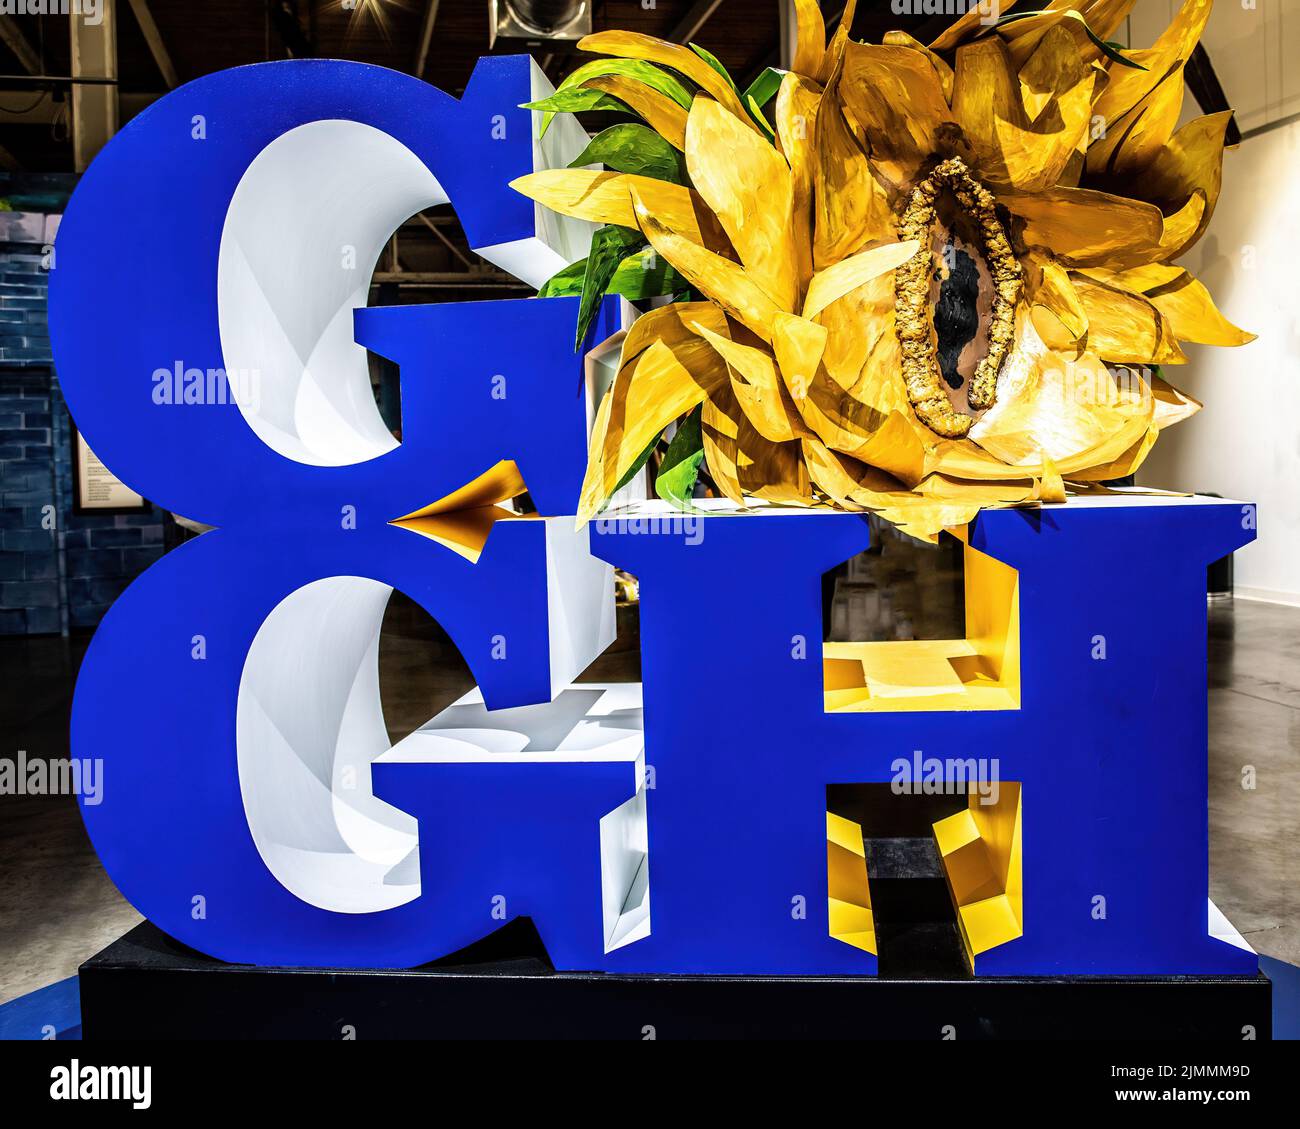 Big blue letters spelling out Gogh with the O being a sunflower which Vincent Van Gogh is famous for painting. Stock Photo